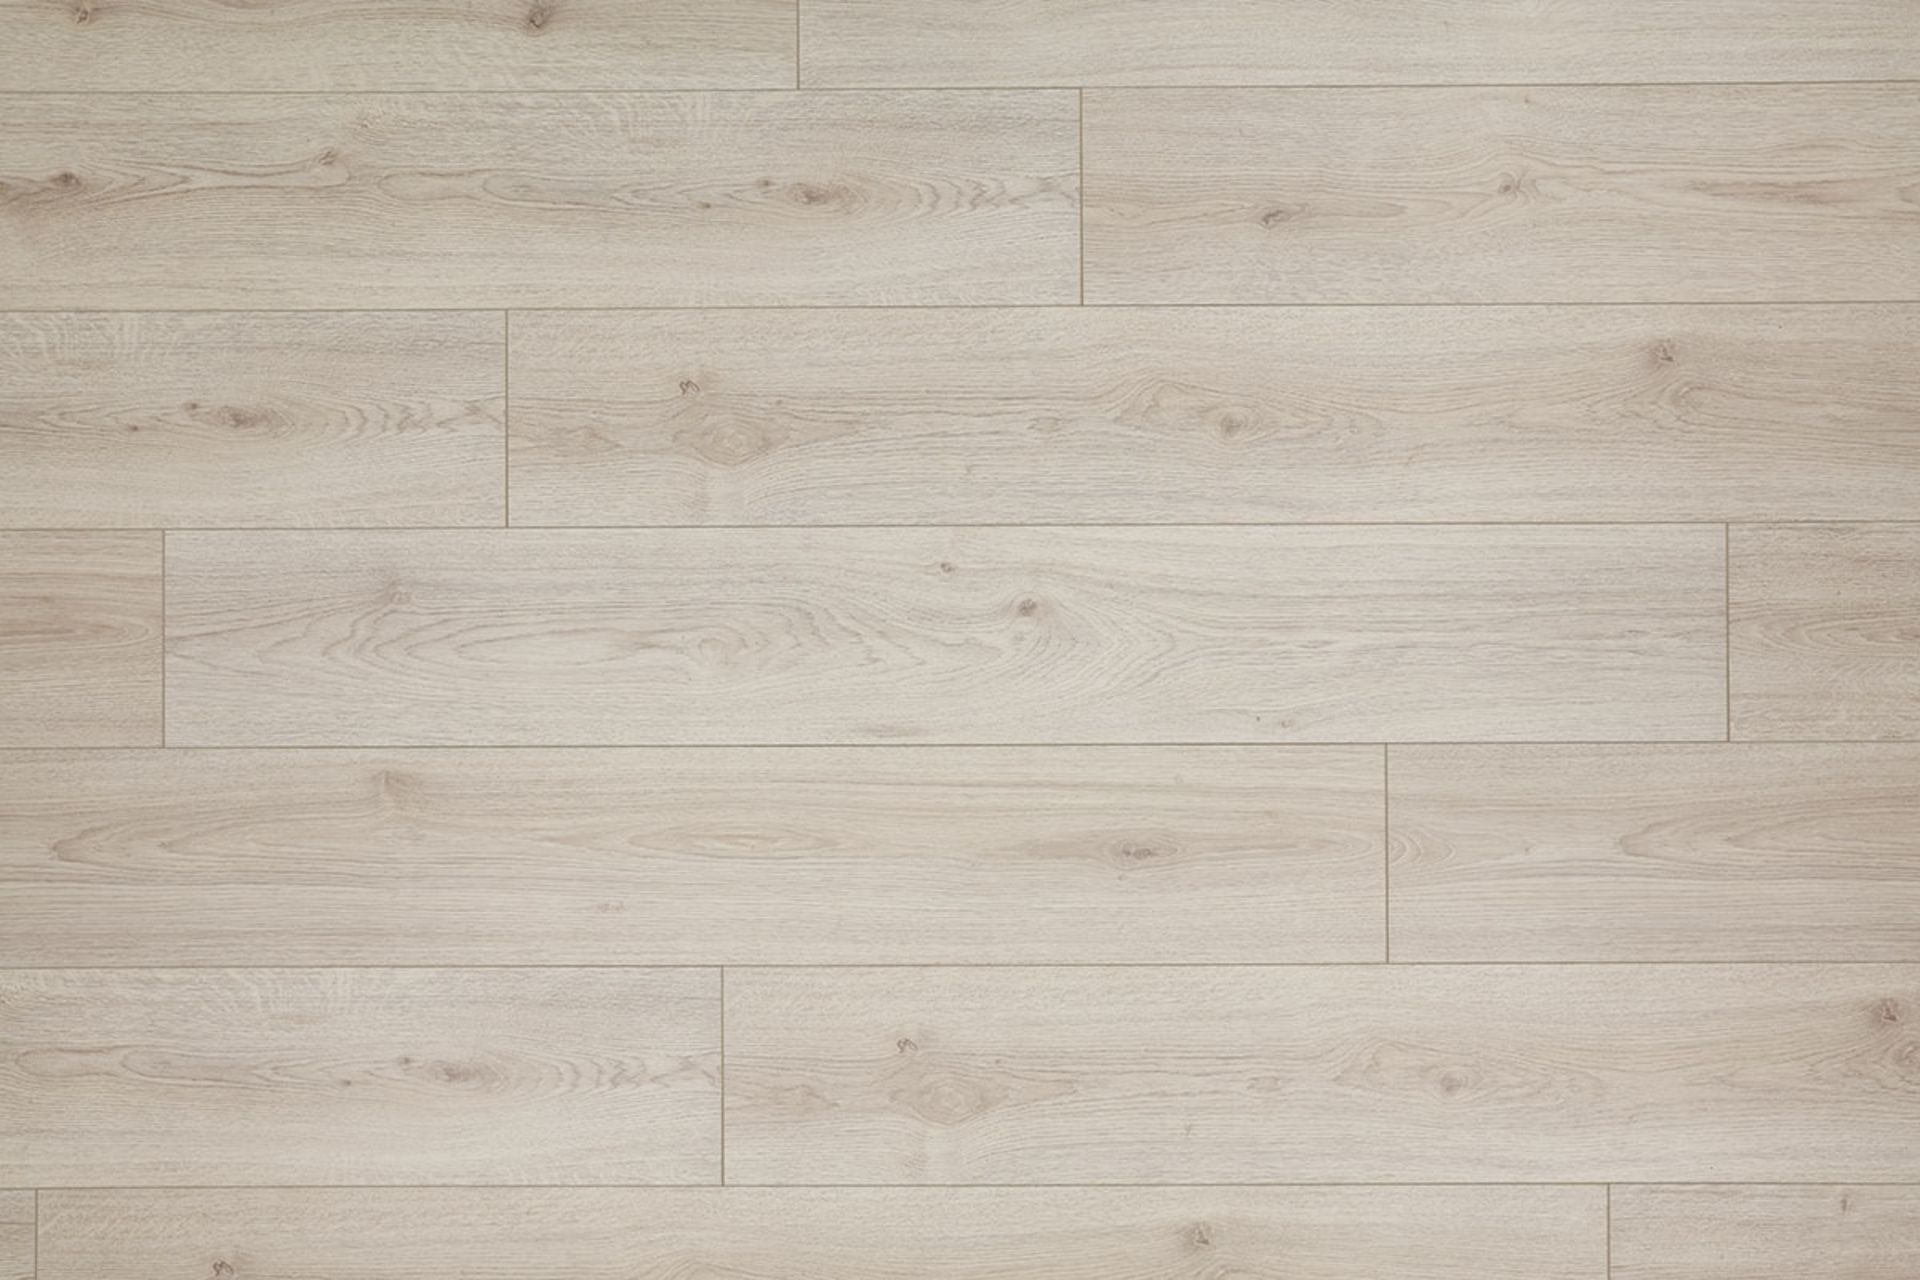 NEW 9.56 Square Meters of LAMINATE FLOORING TREND GREY OAK. With a warm grey hue and an authent... - Image 2 of 2